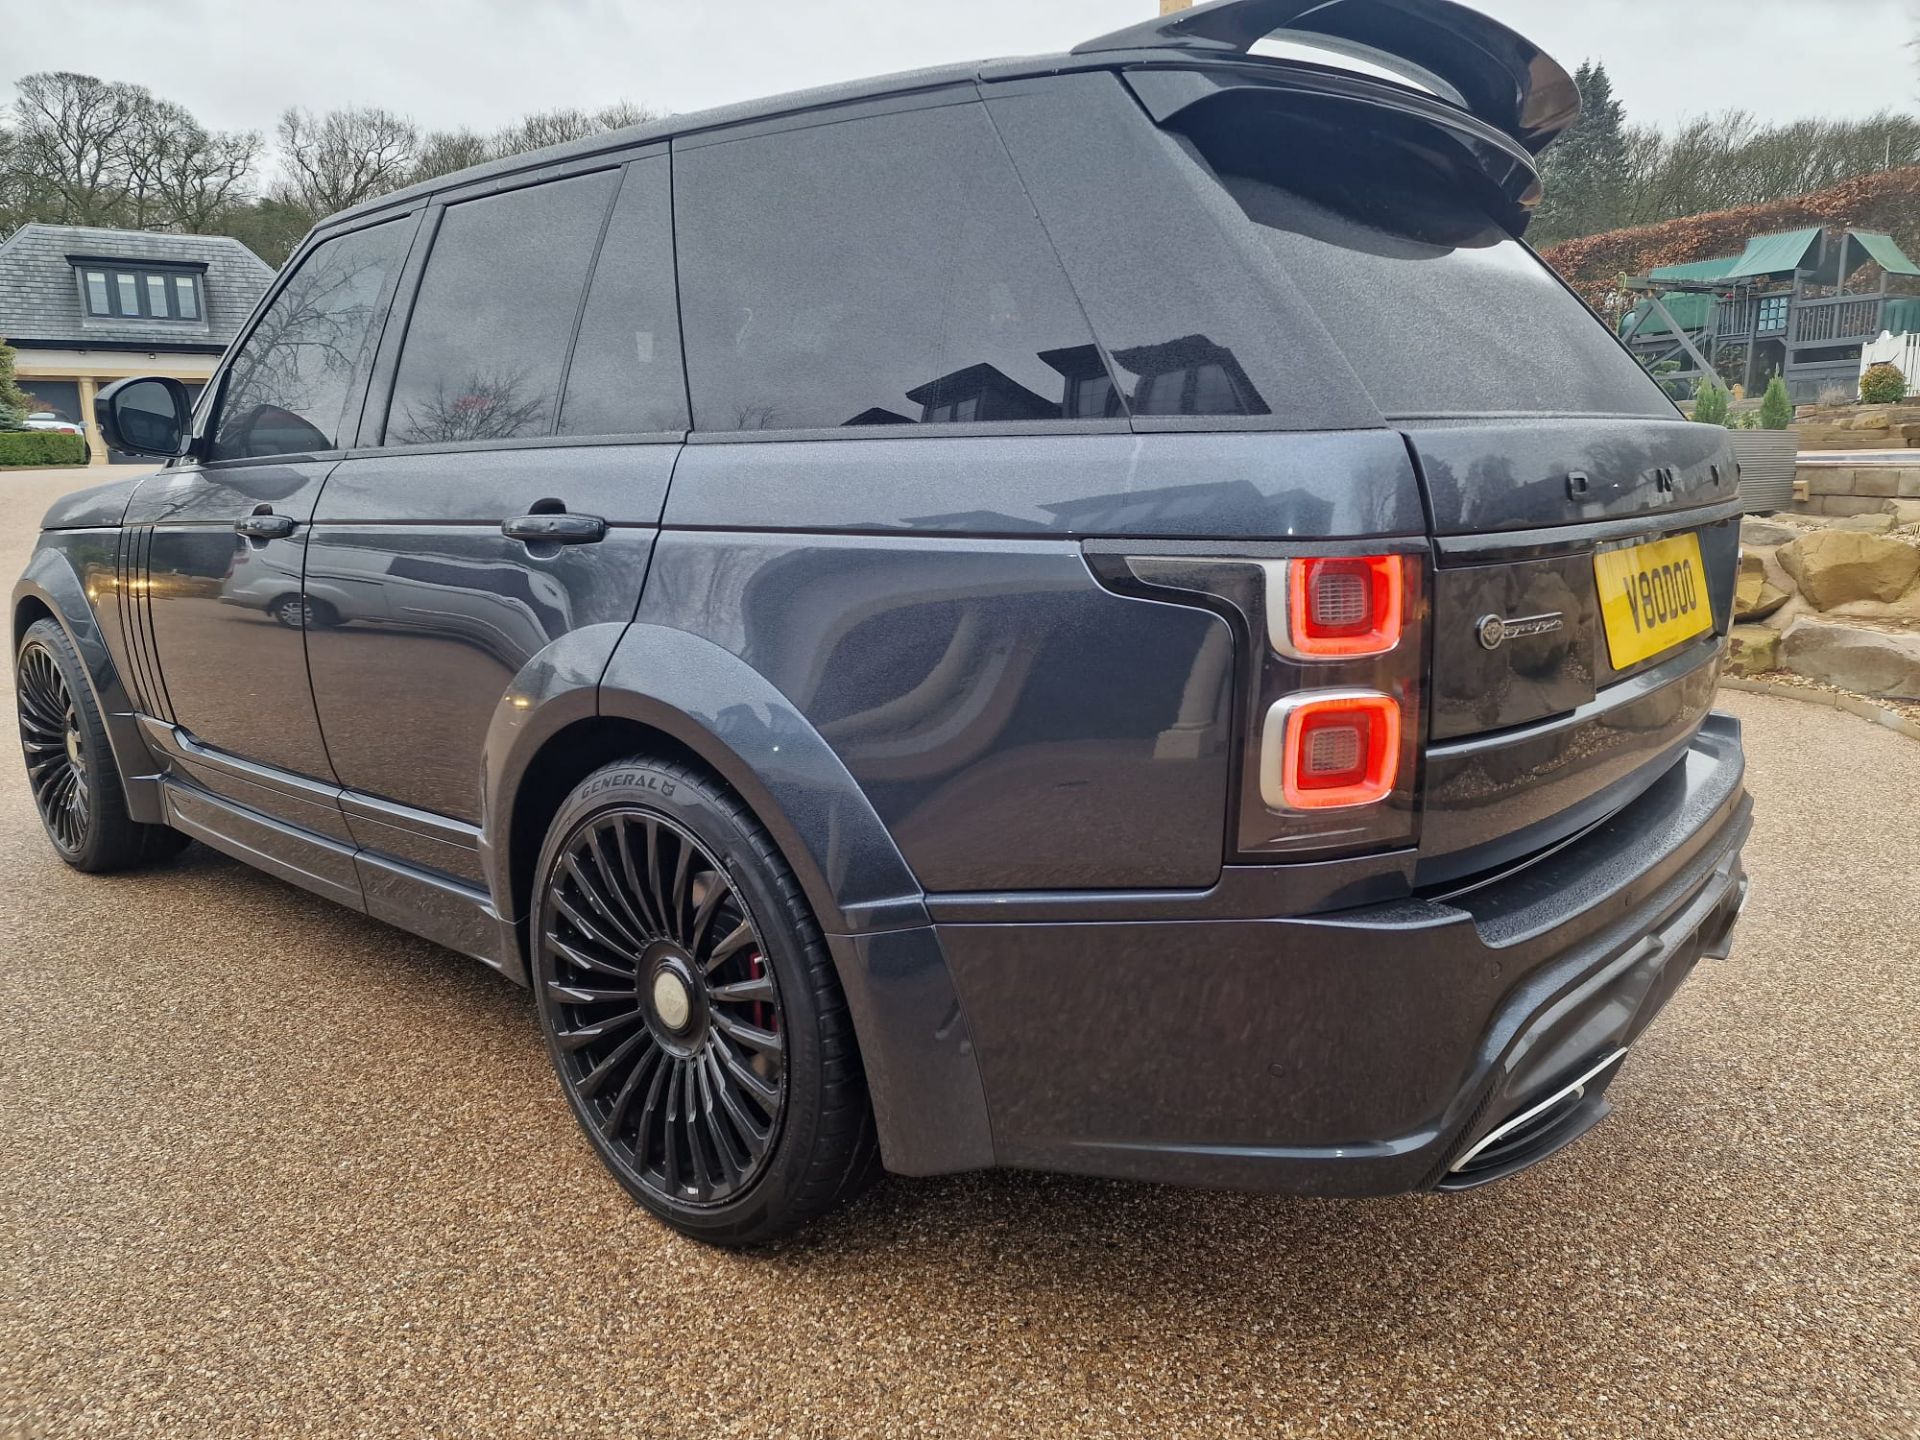 2018/68 RANGE ROVER SV AUTOBIOGRAPHY DYN V8 SC AUTO - £40K WORTH OF ONYX BODY KIT AND CONVERSION - Image 11 of 77